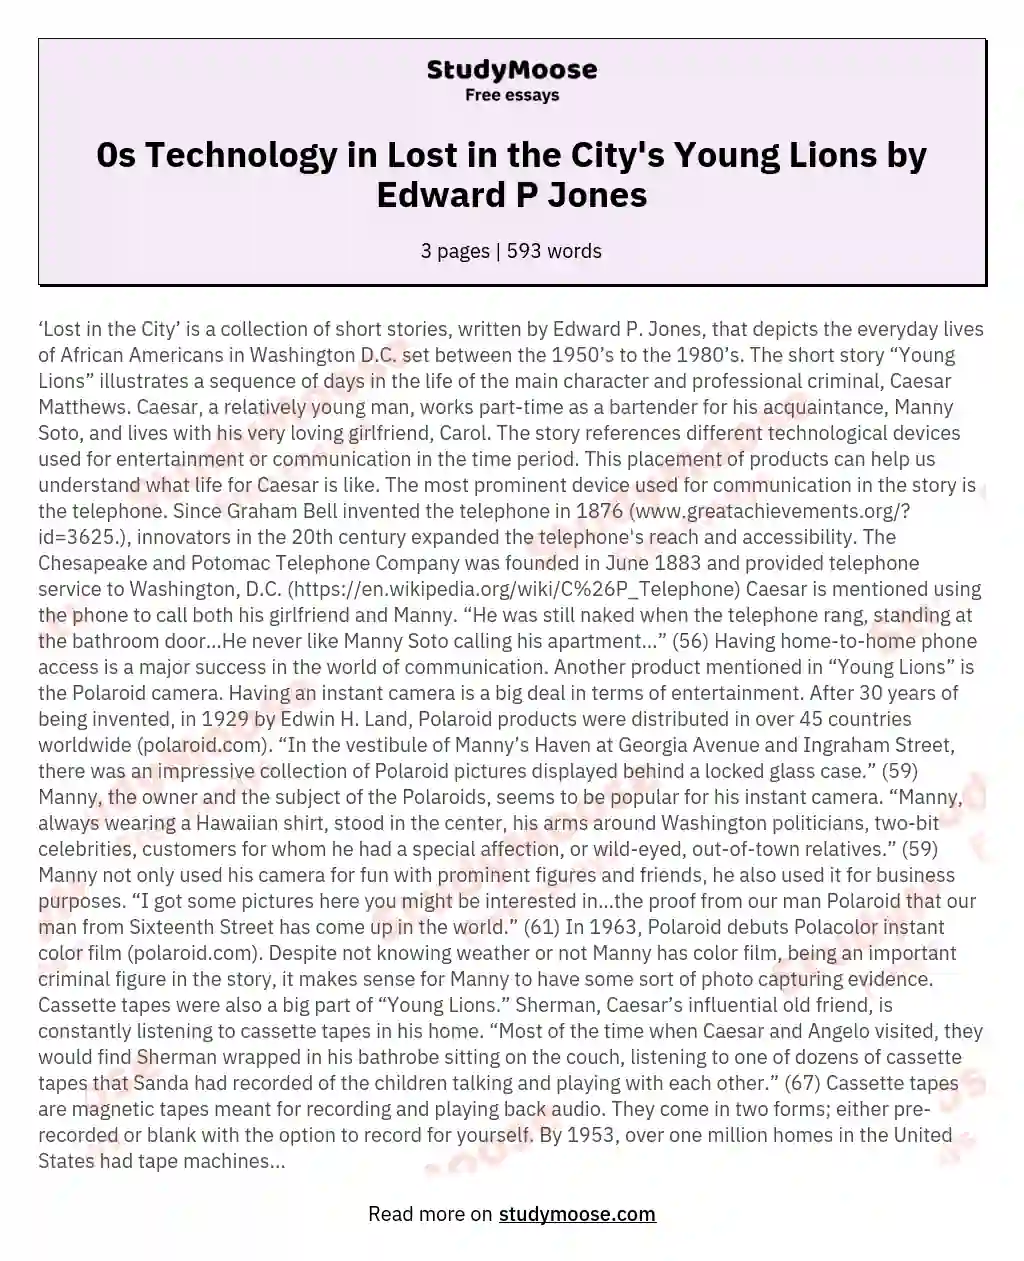 The Depiction of 1970’s Technology in “Young Lions” in Edward P. Jones’ “Lost in the City”